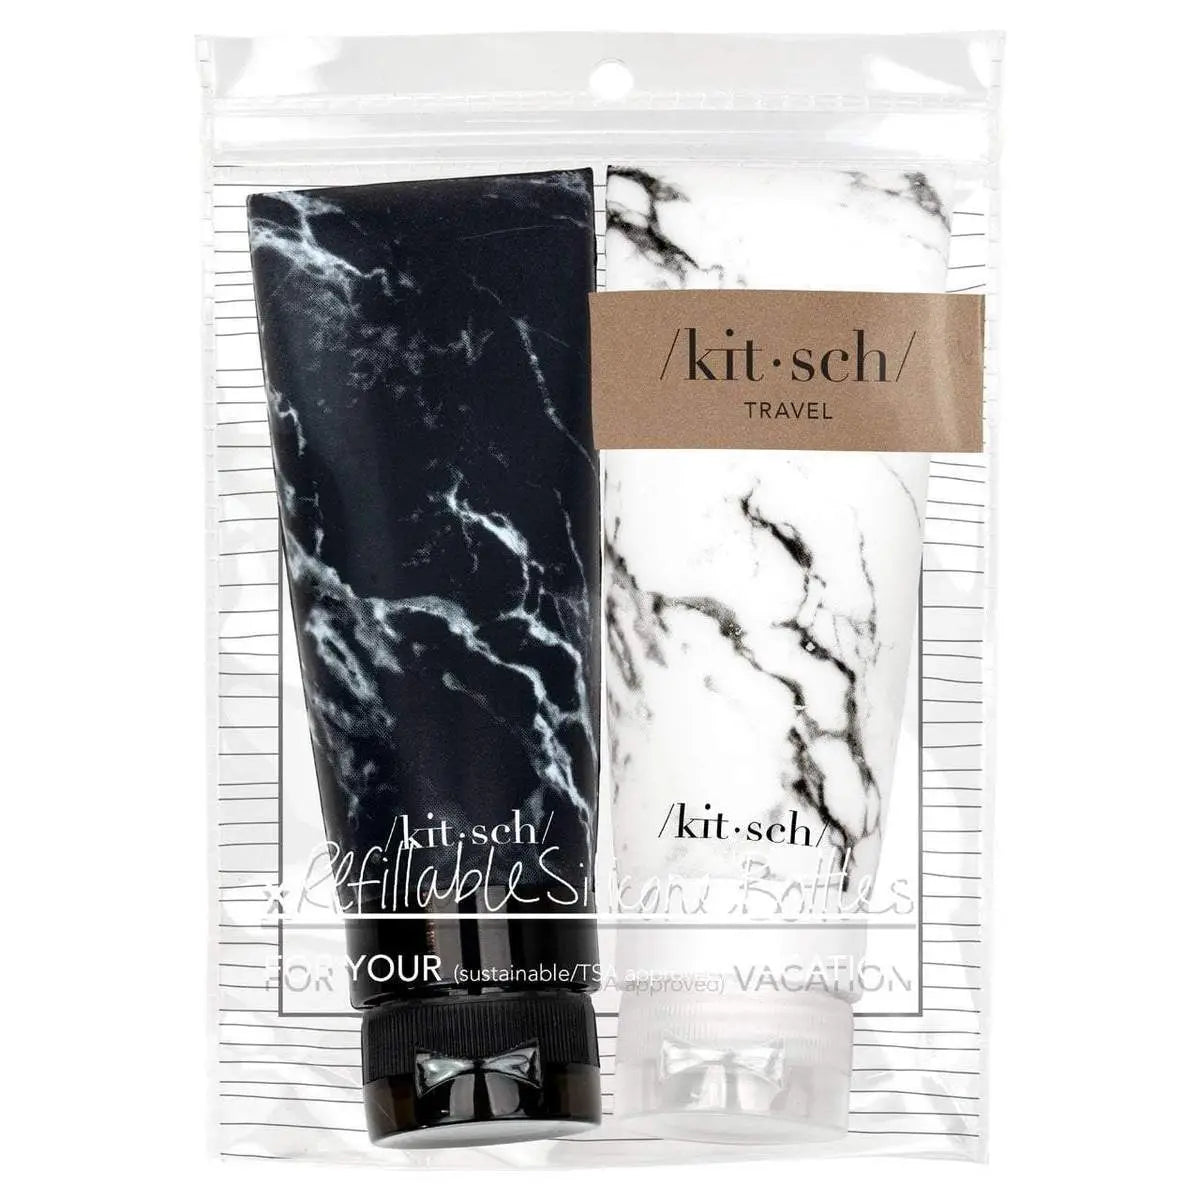 Refillable Silicone Bottle 2PC Set by KITSCH. TSA Approved silicone bottles for travel in white marble and black marble